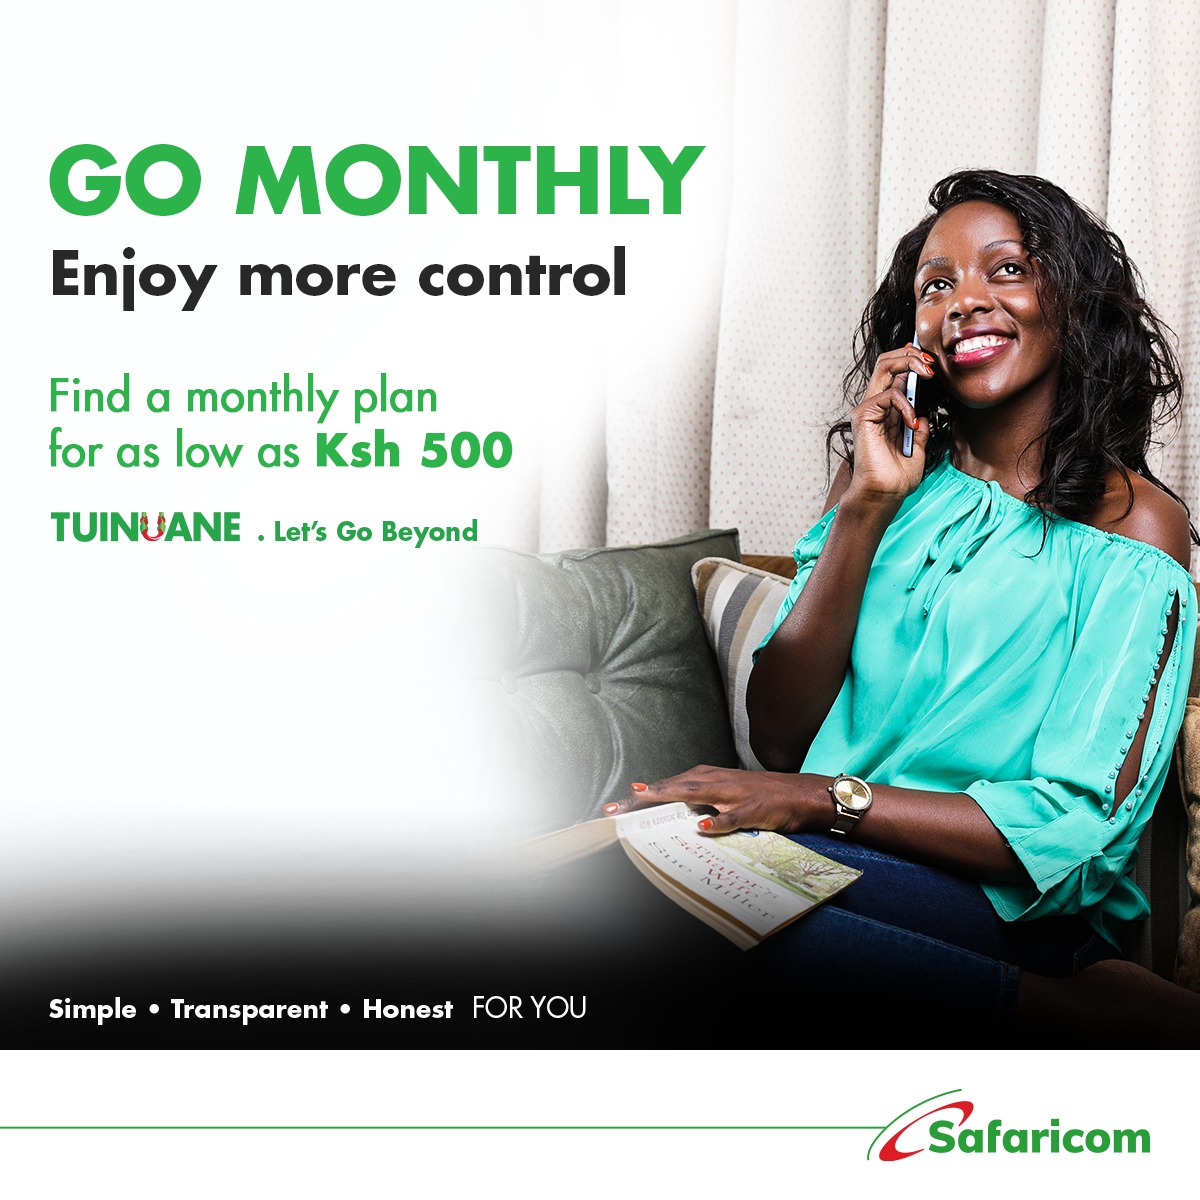 Lets #GoMonthly with @SafaricomPLC bundles that are cheaper than before and you get more value for less. Worry free monthly connections using #SafaricomGoMonthly. @MjengoKE, @Keam_254 and @ItsKhakame Dial *544# or Go to MySafaricom App and get to enjoy the amazing offer .